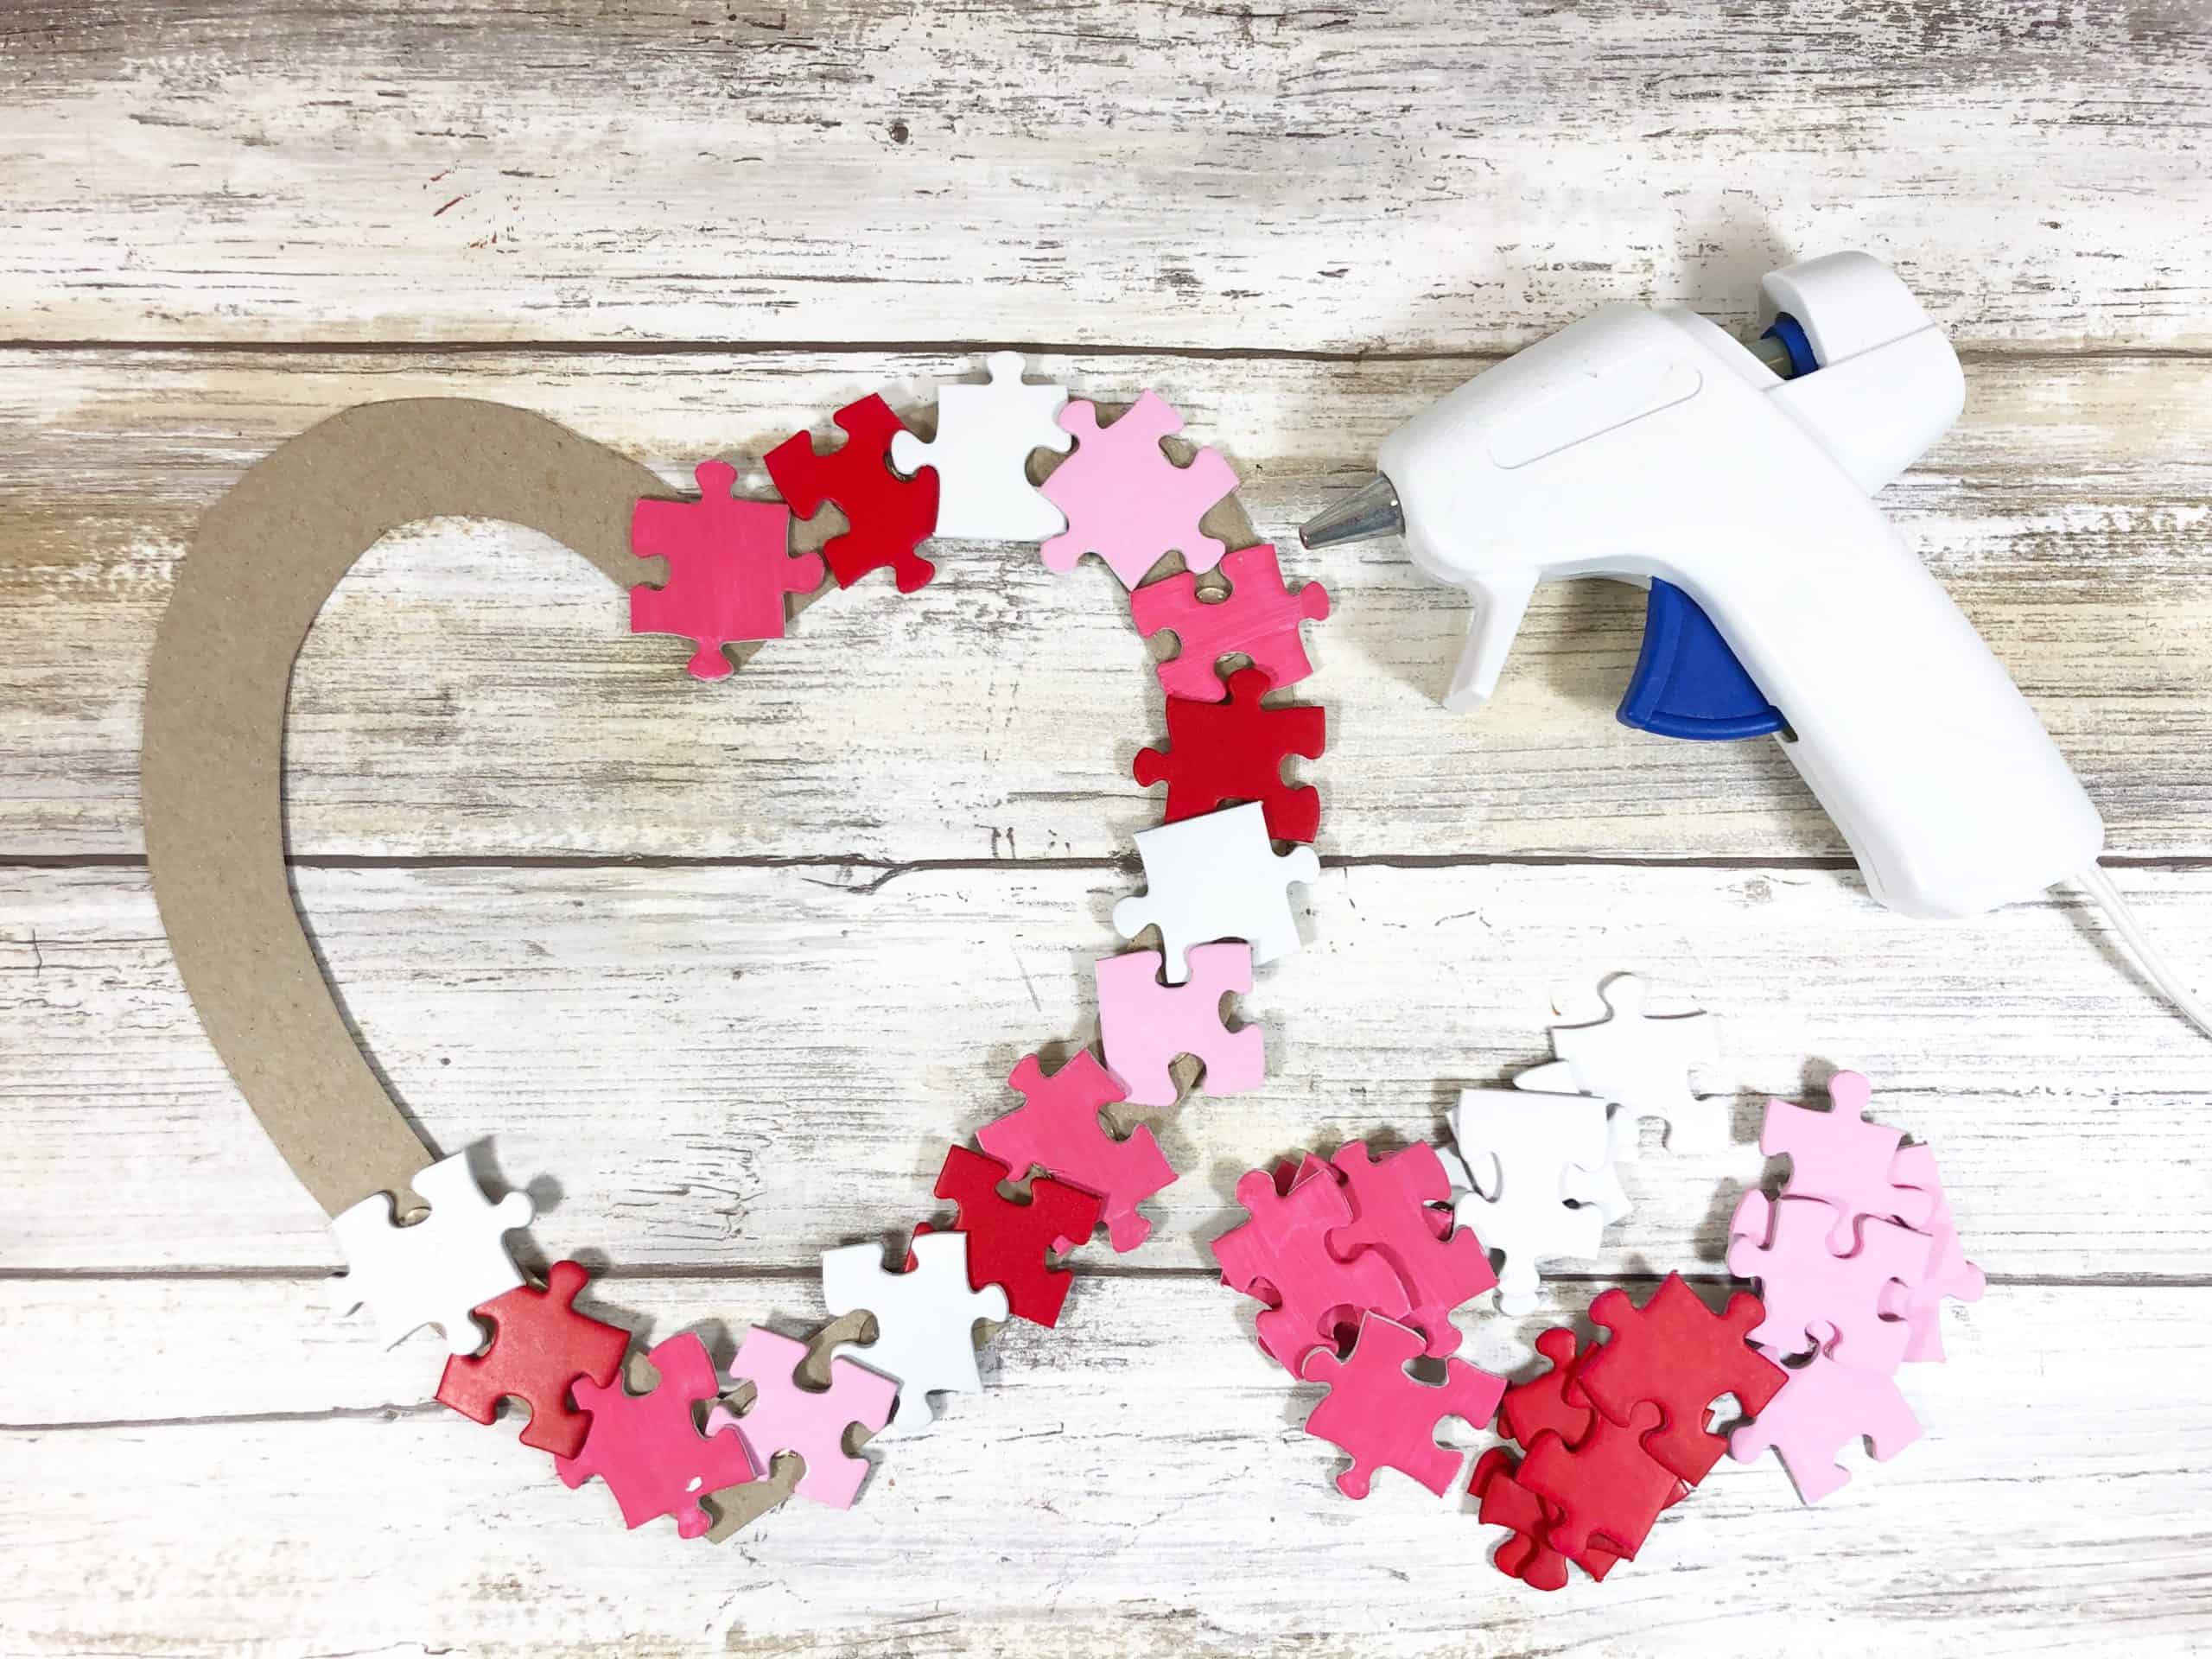 Fun Diy How To Make A Heart Wreath With Puzzle Pieces Hispana Global